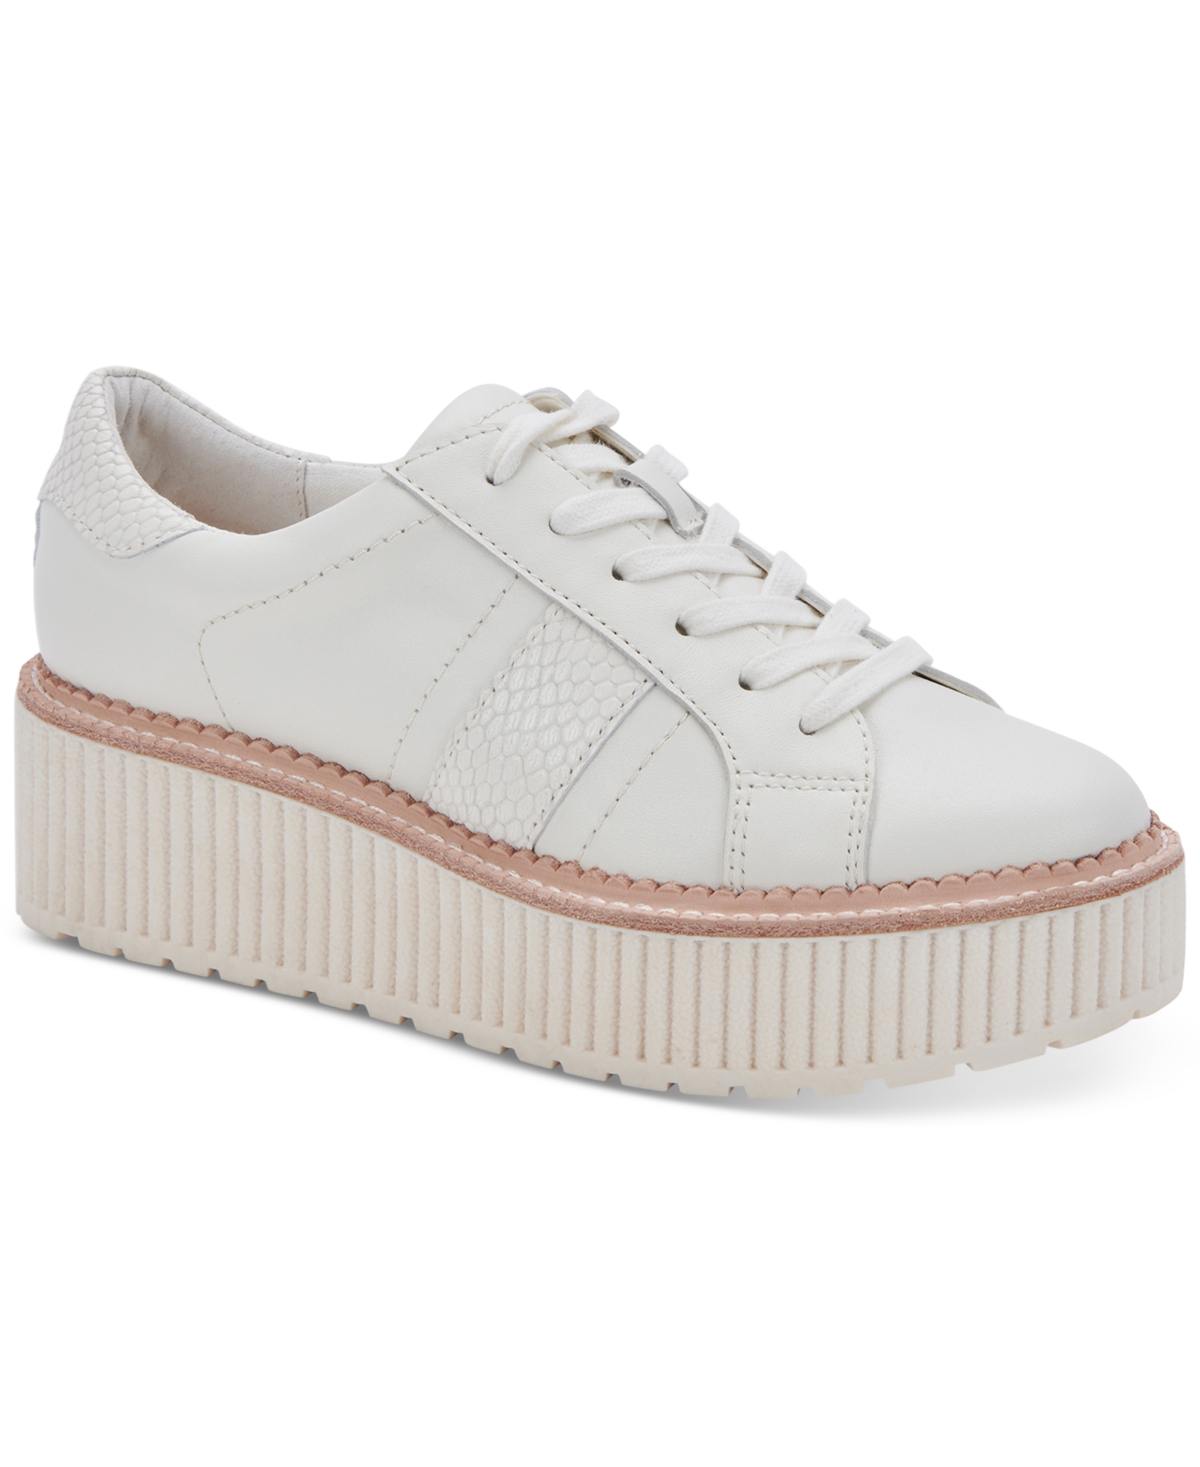 Dolce Vita Women's Tiger Lace-up Platform Sneakers In White Leather